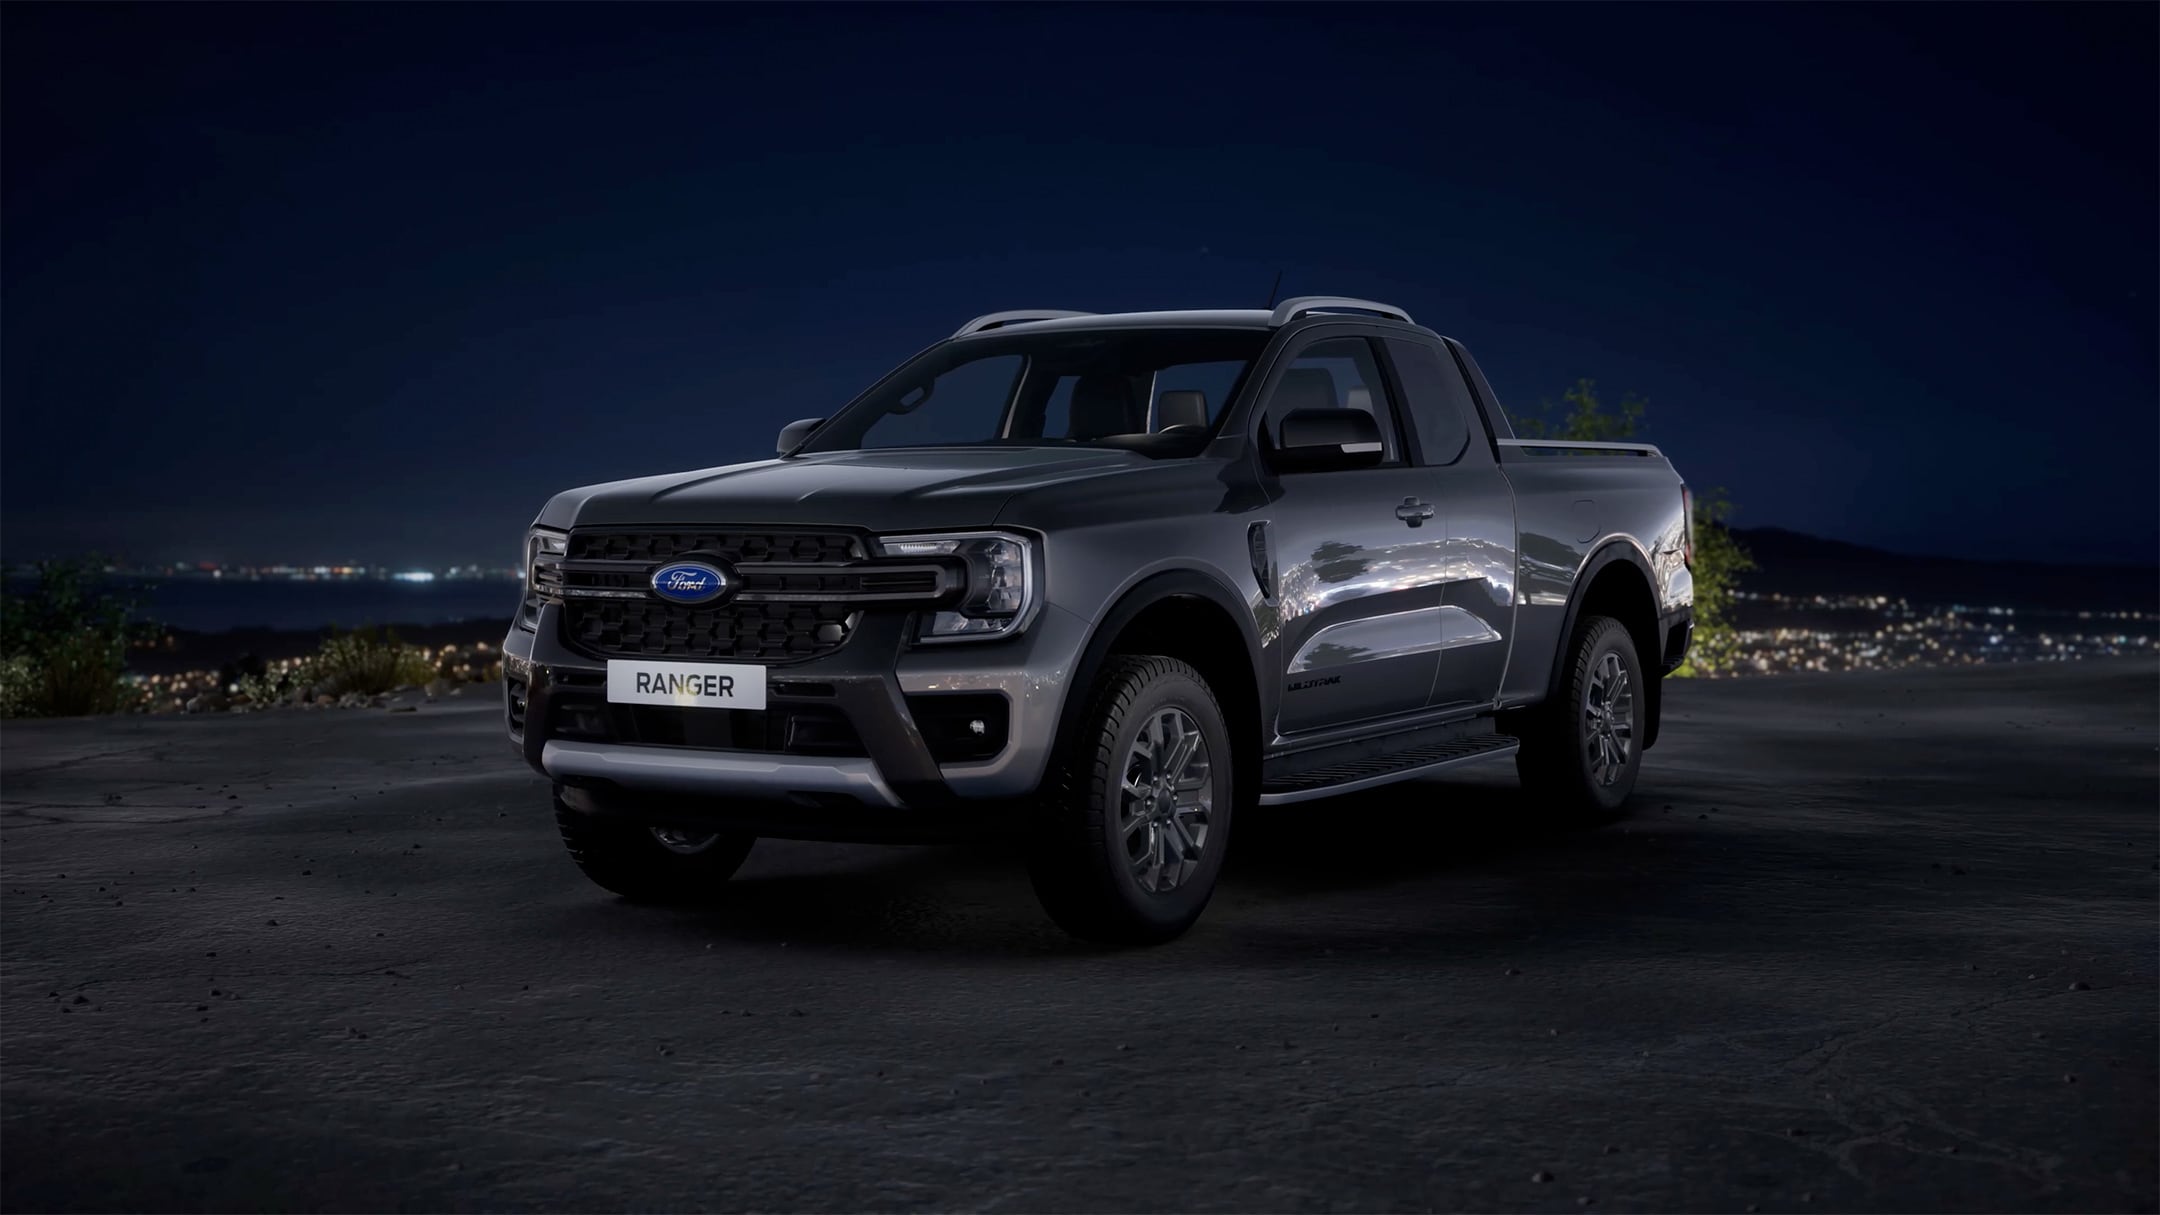 All-New Ford Ranger in carbonized grey front 3/4 view parked on cliff overlooking city at night